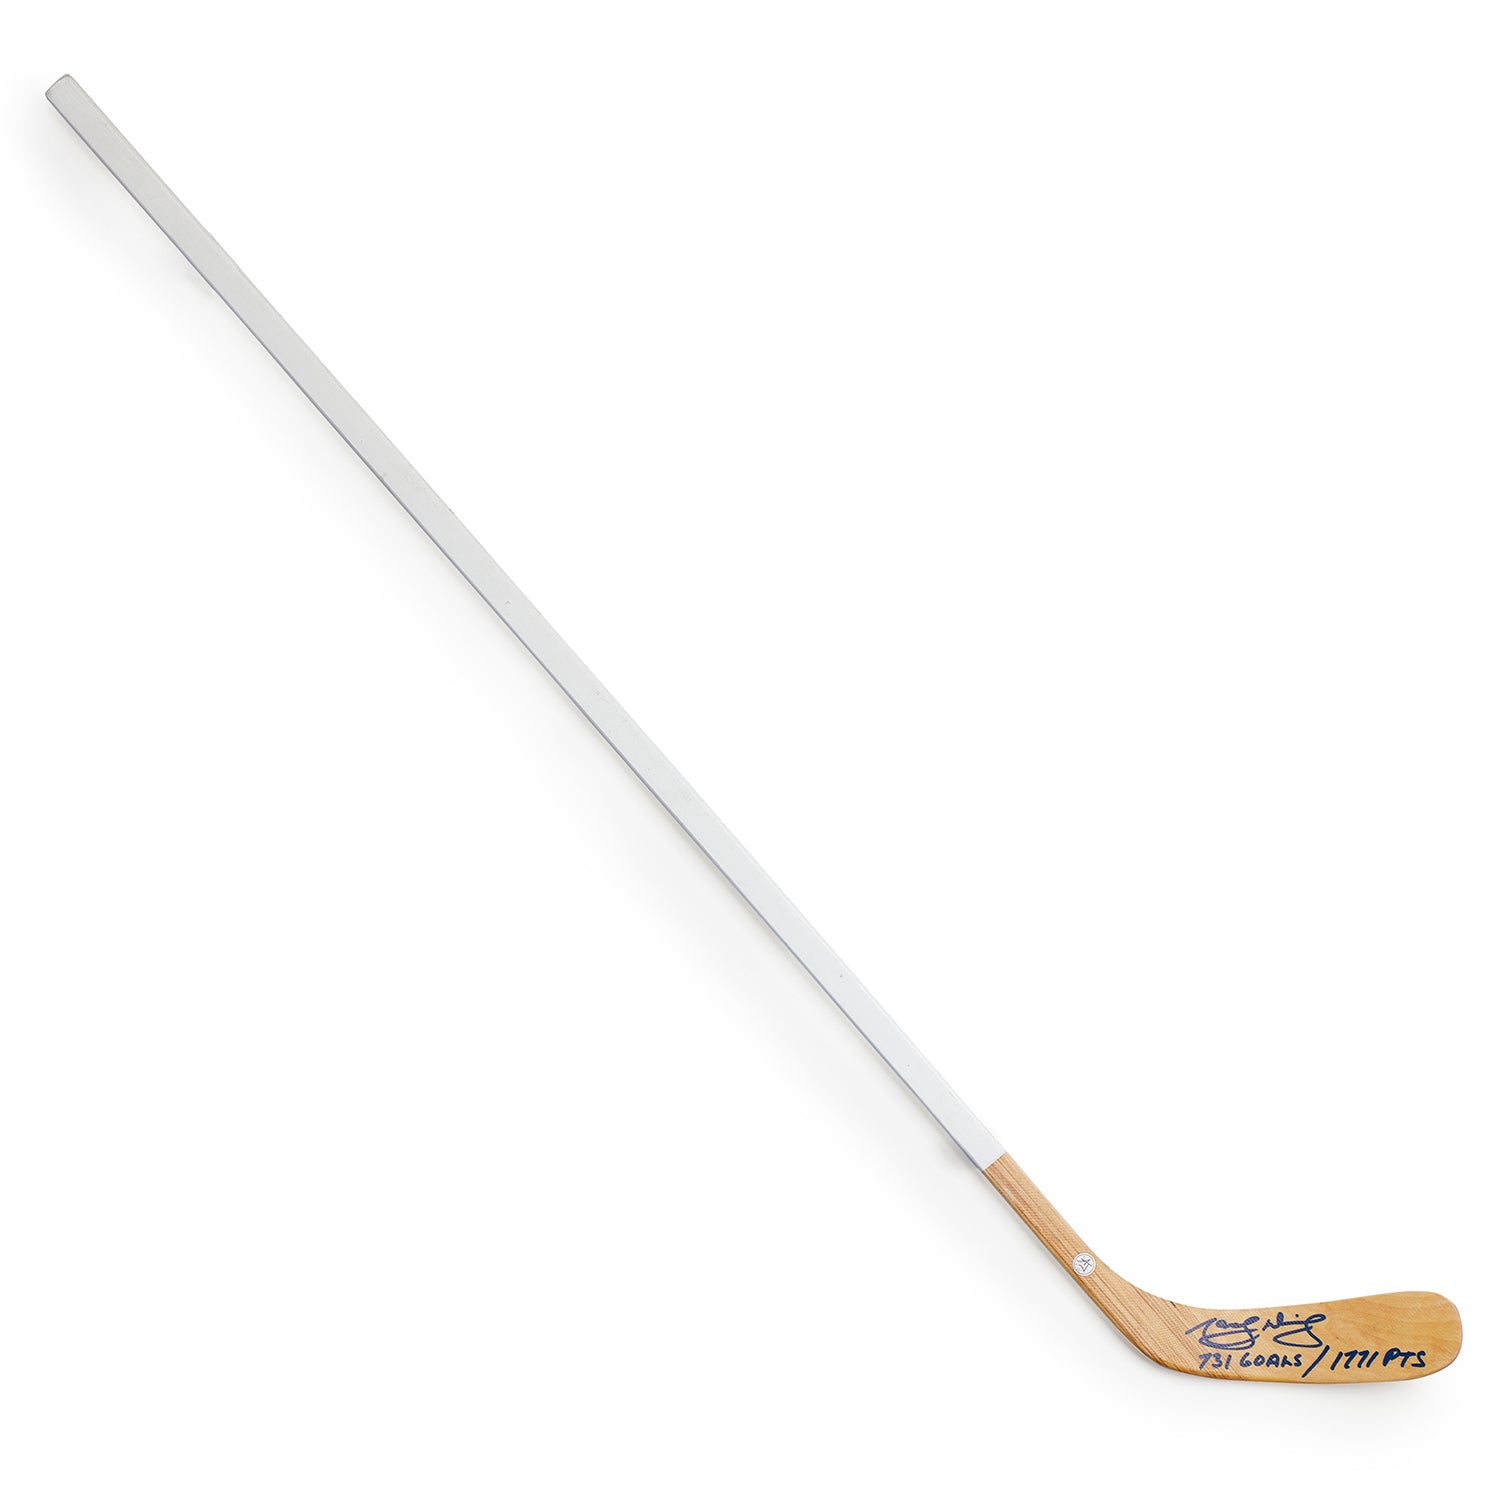 Marcel Dionne Autographed White Hockey Stick